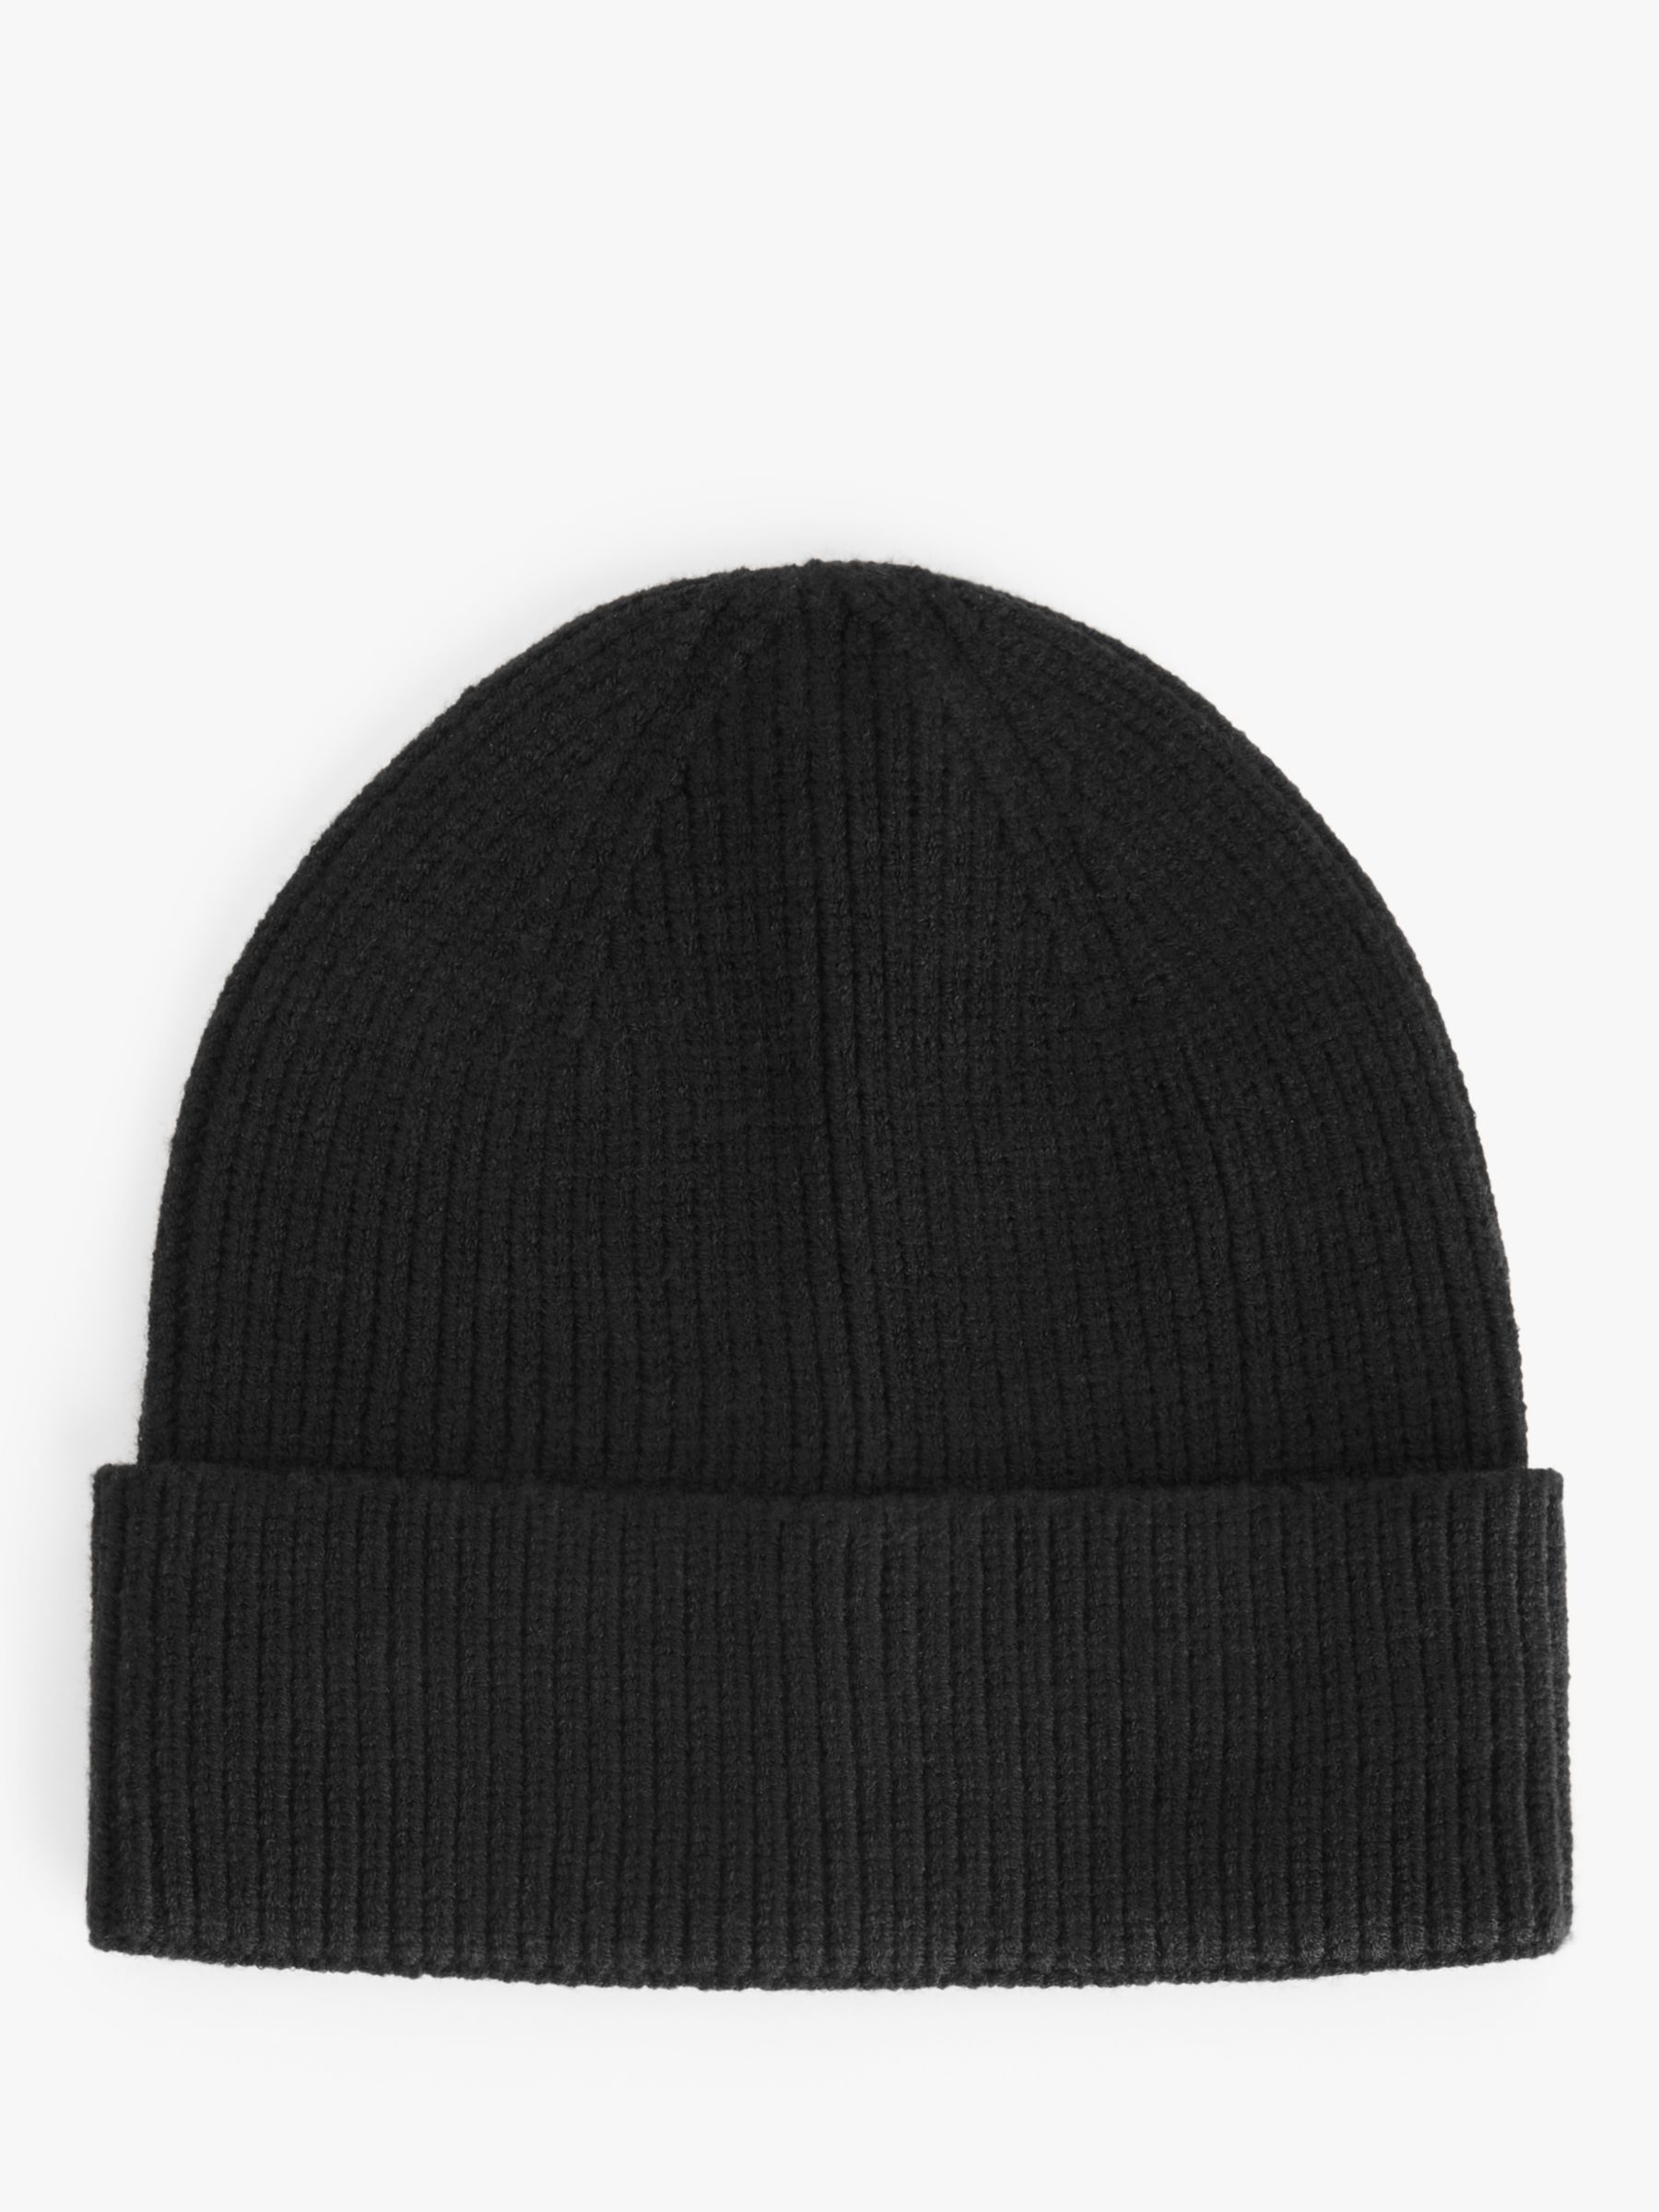 John Lewis ANYDAY Knitted Beanie, Jet Black at John Lewis & Partners